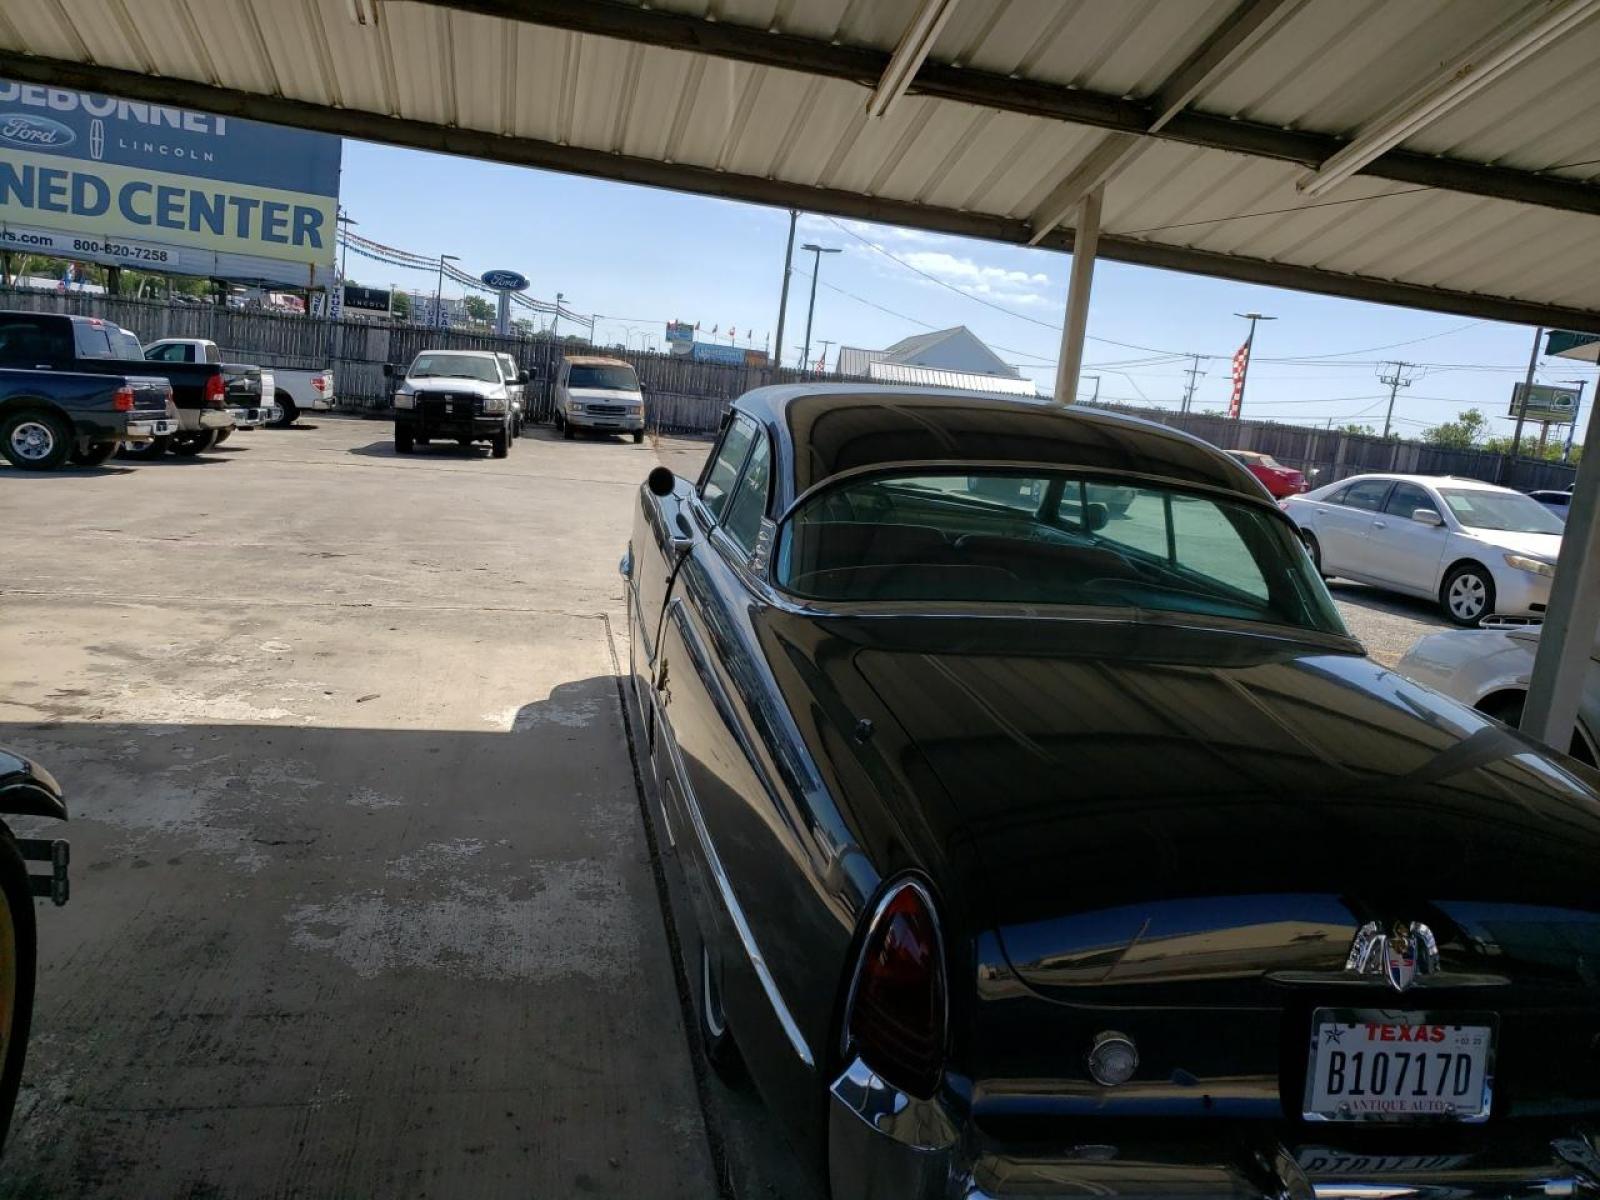 1953 Black /Red Lincoln Capri (53LA7562H) , Automatic transmission, located at 1687 Business 35 S, New Braunfels, TX, 78130, (830) 625-7159, 29.655487, -98.051491 - Check this out! This 1953 Lincoln Capri is ready for it's new home. Over $60,000.00 restoration with a rebuilt 351 M V8 engine. Power windows, power locks, and a South Texas car, so forget about the rust. The chrome bumpers aren't up to car show quality, but great for everyday driving. Under 10,000 - Photo #2